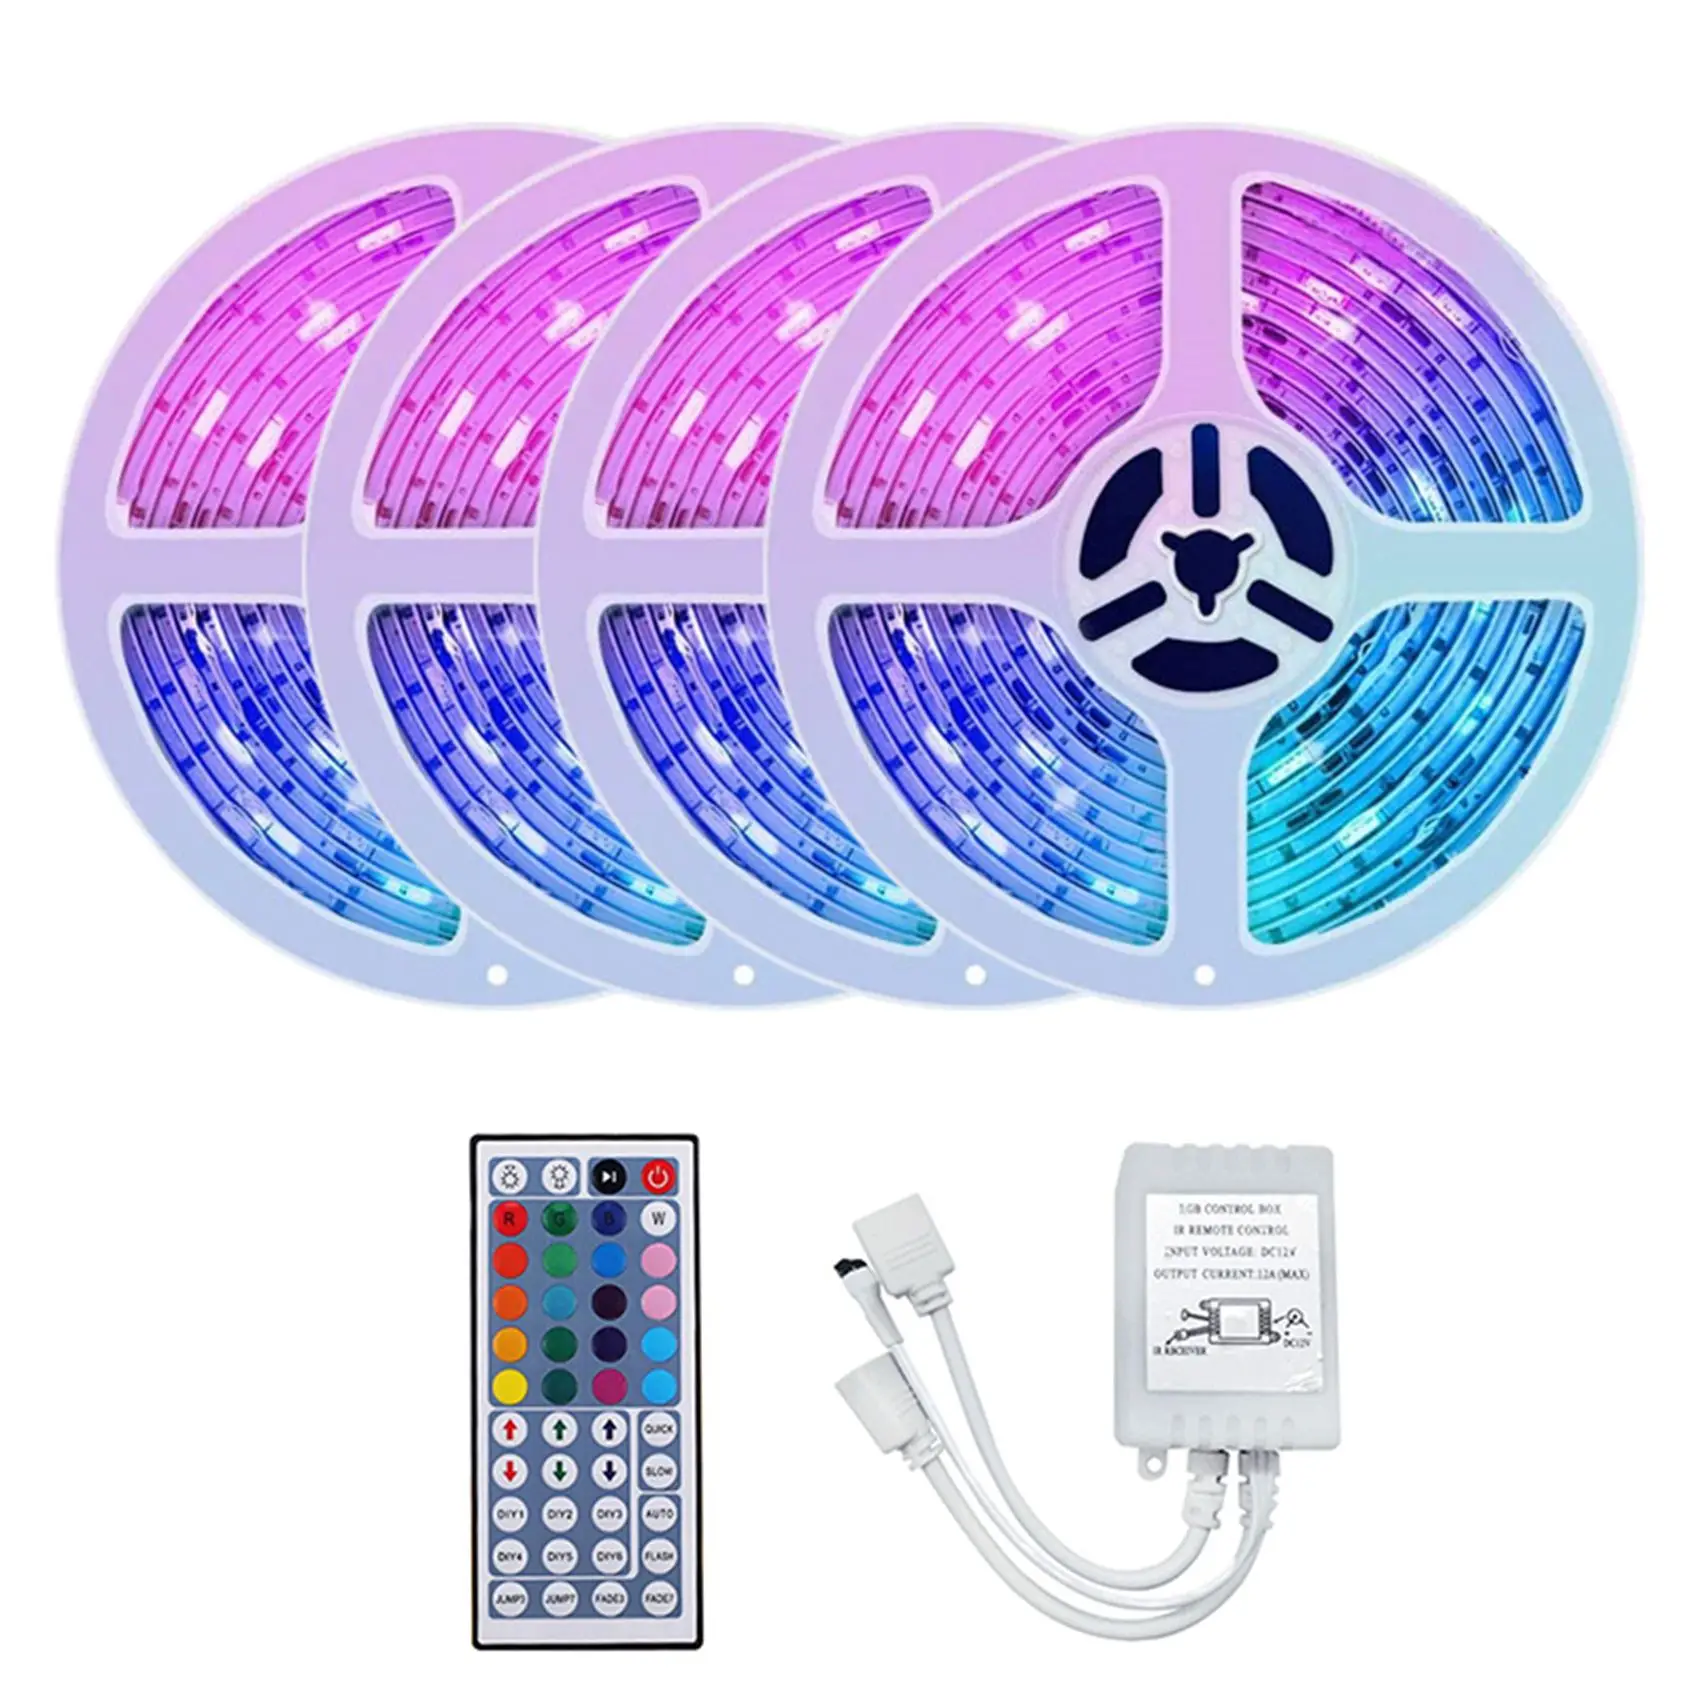 

2835 RGB Light Strip 20M Flexible LED Light Strip with 44 Keys Remote Controller+Controller for Valentine's Day Bedroom